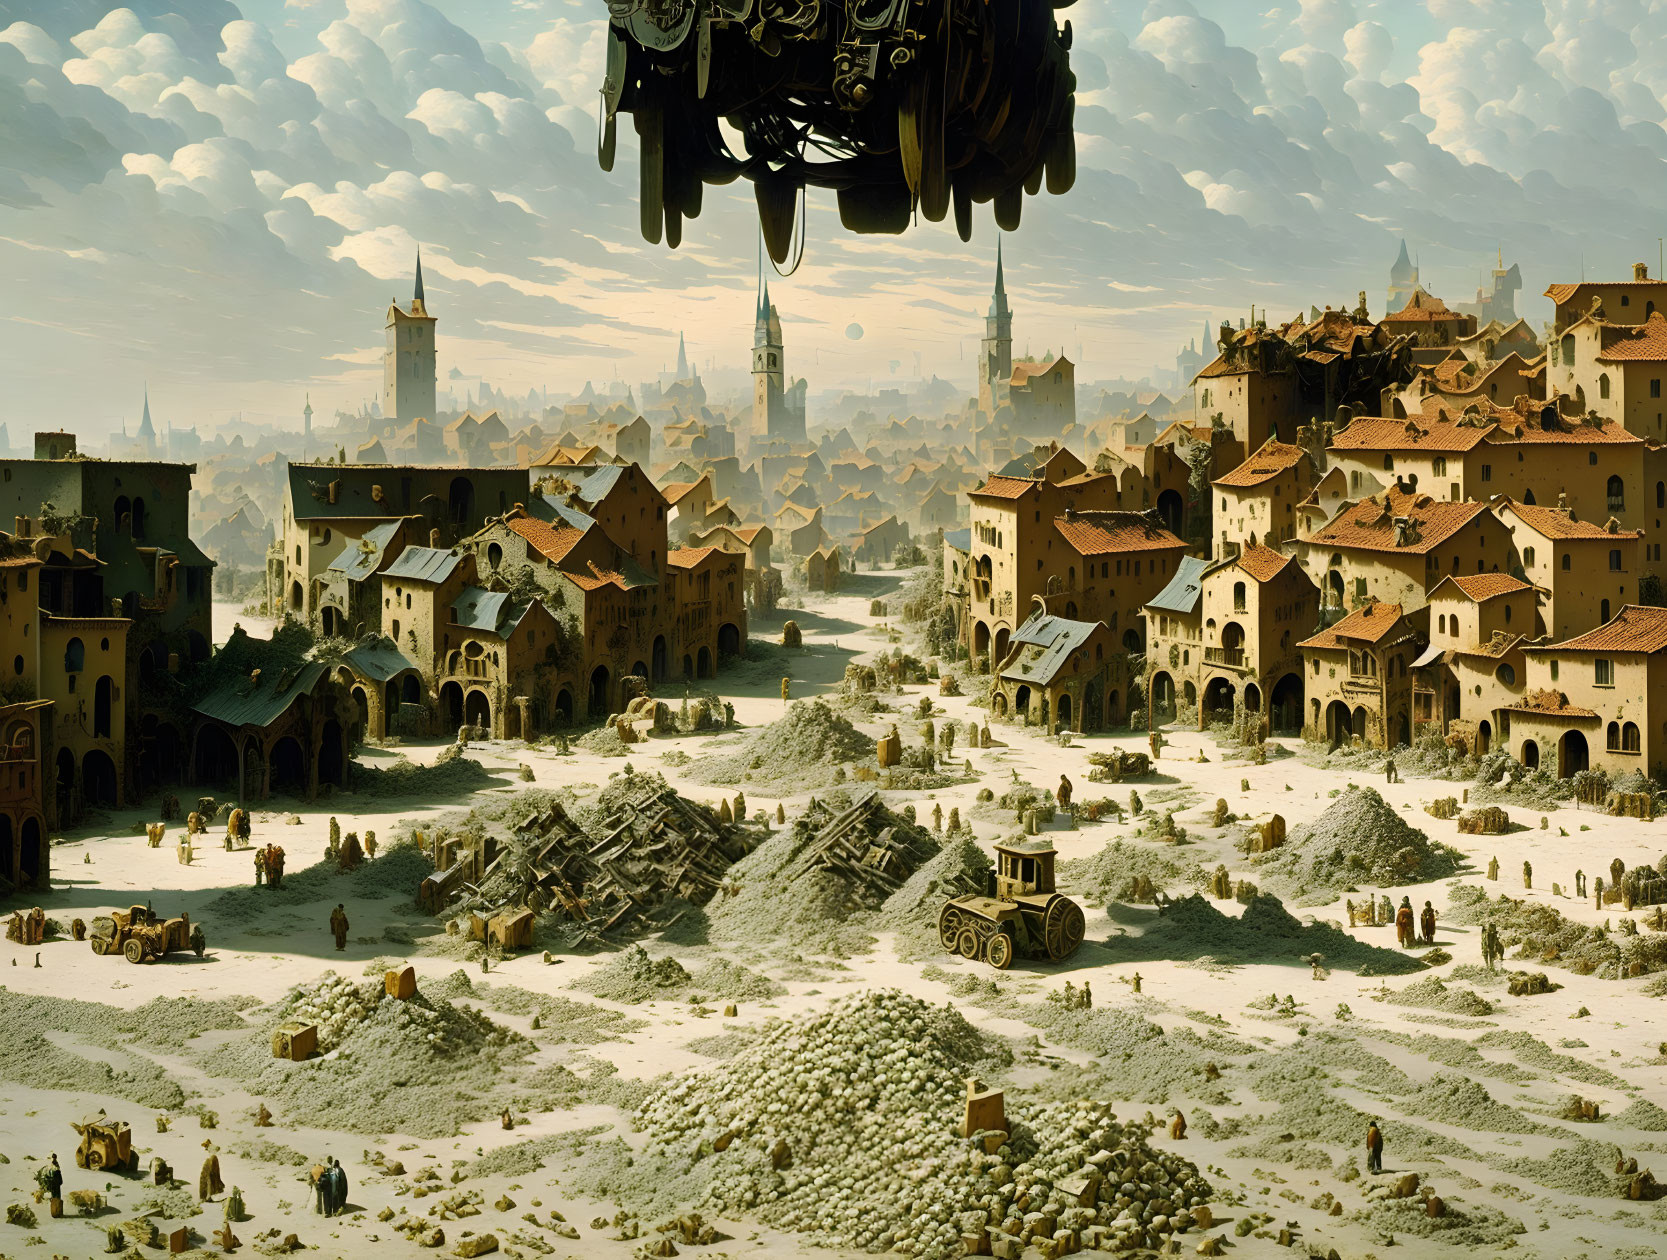 Fantastical cityscape with old-world architecture and hovering airship in sandy landscape